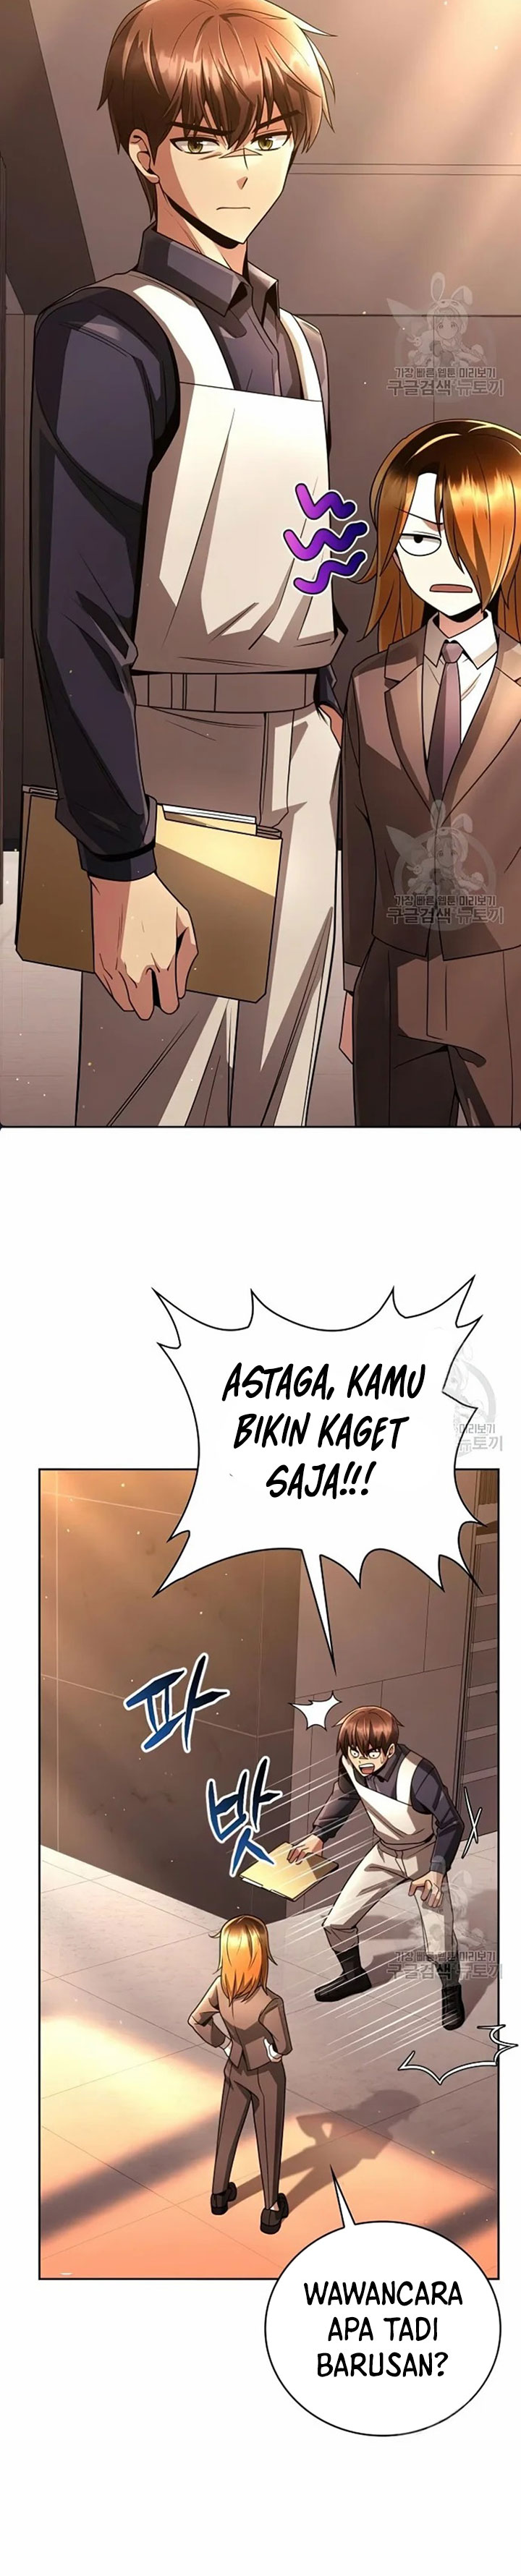 Dilarang COPAS - situs resmi www.mangacanblog.com - Komik clever cleaning life of the returned genius hunter 029 - chapter 29 30 Indonesia clever cleaning life of the returned genius hunter 029 - chapter 29 Terbaru 18|Baca Manga Komik Indonesia|Mangacan